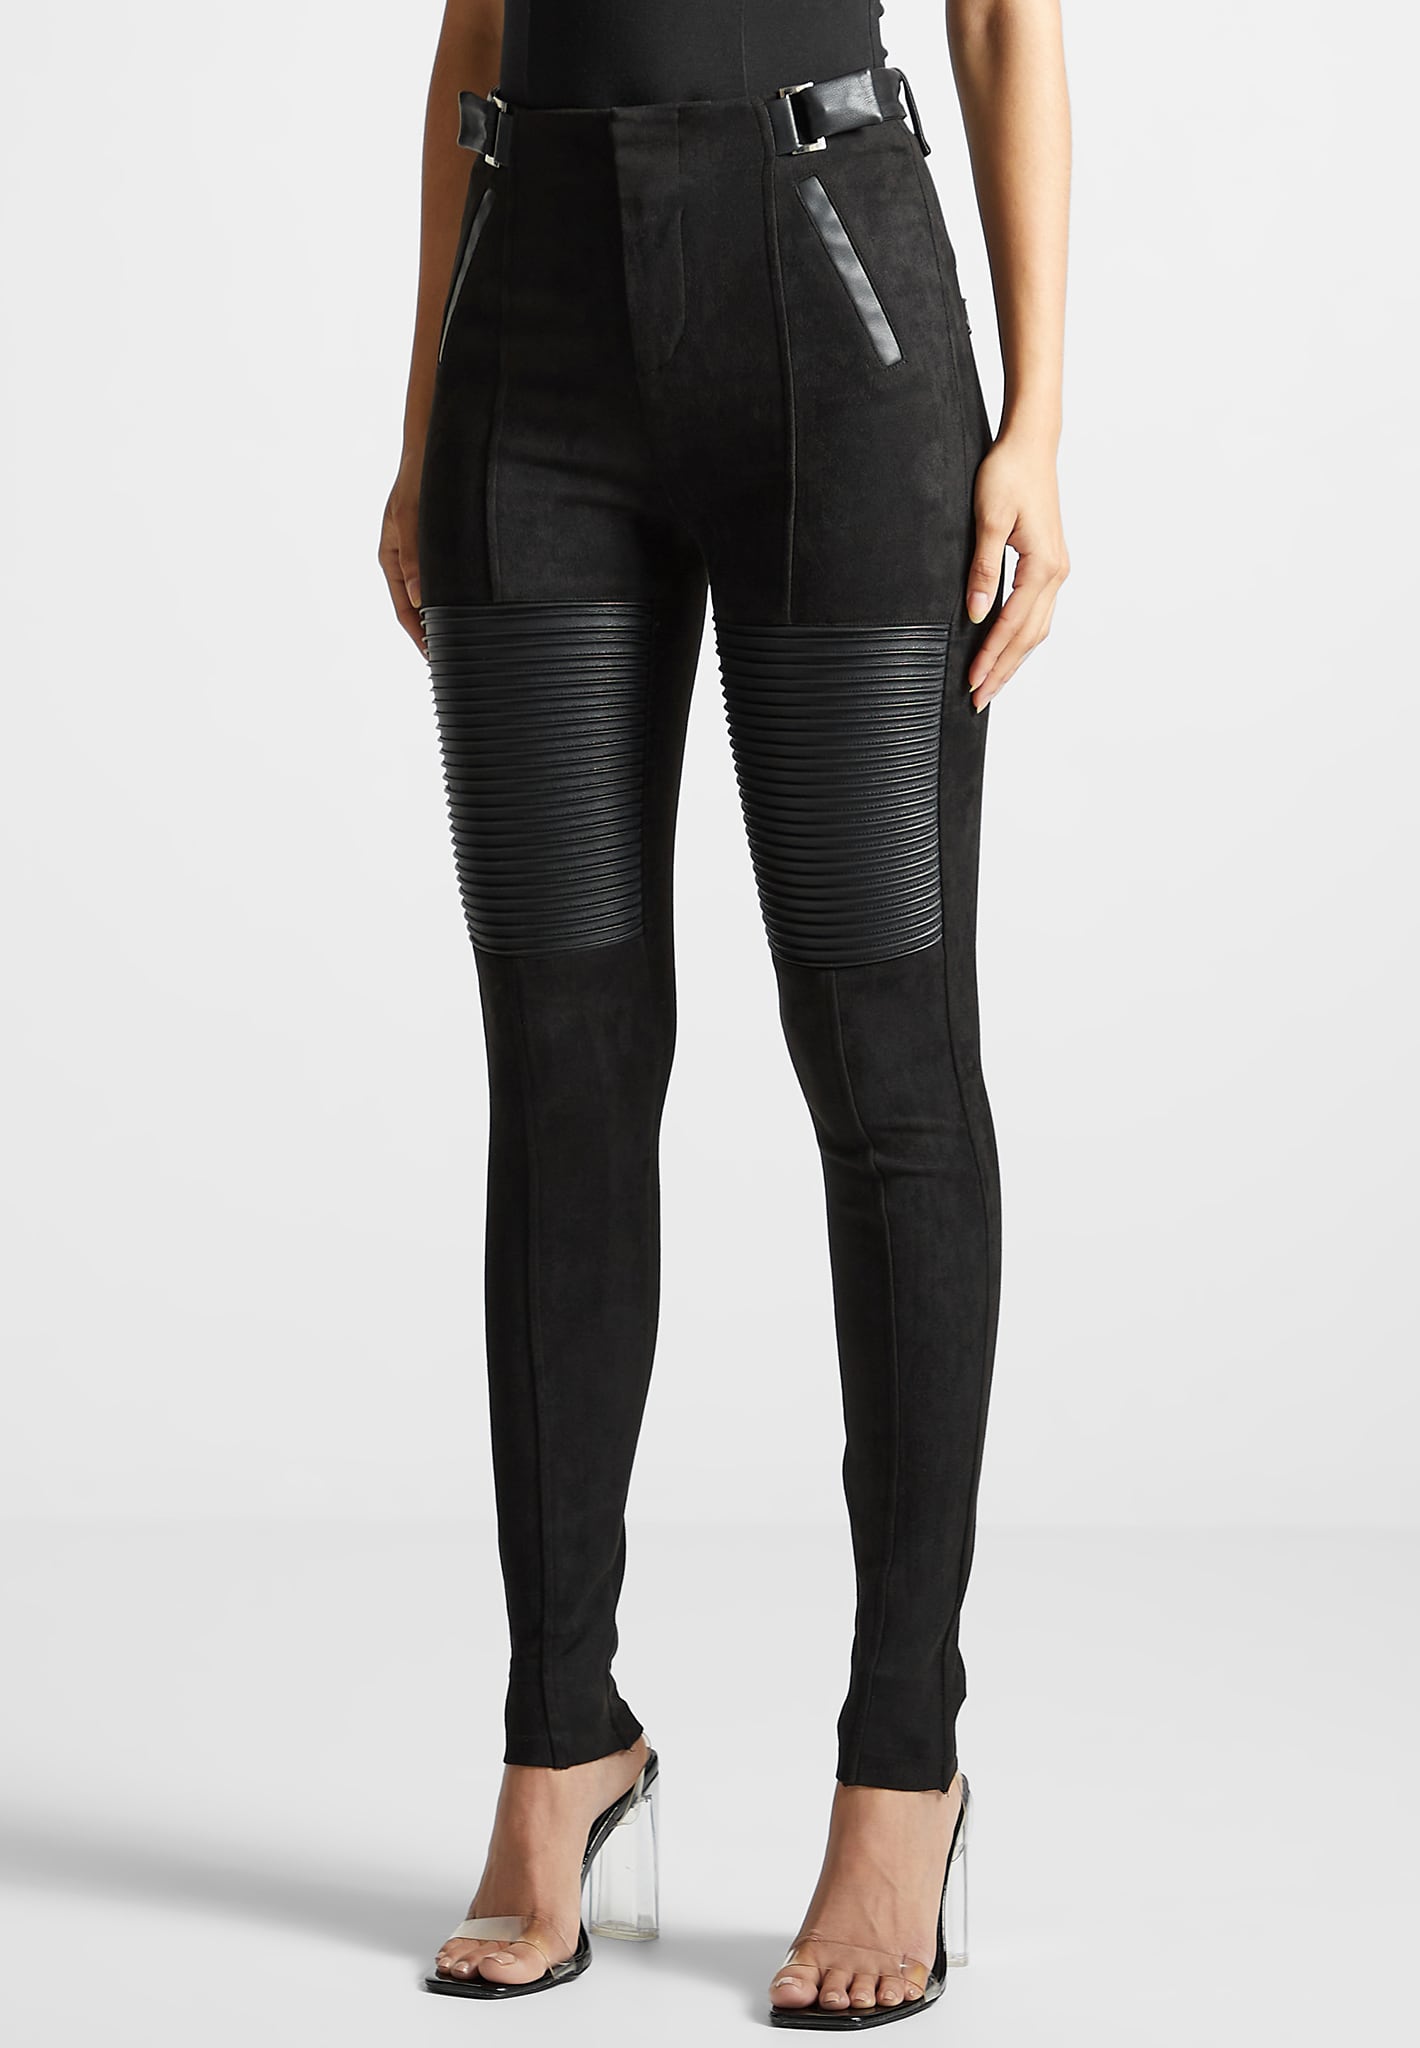 Vegan Leather and Suede Ribbed Leggings - Black